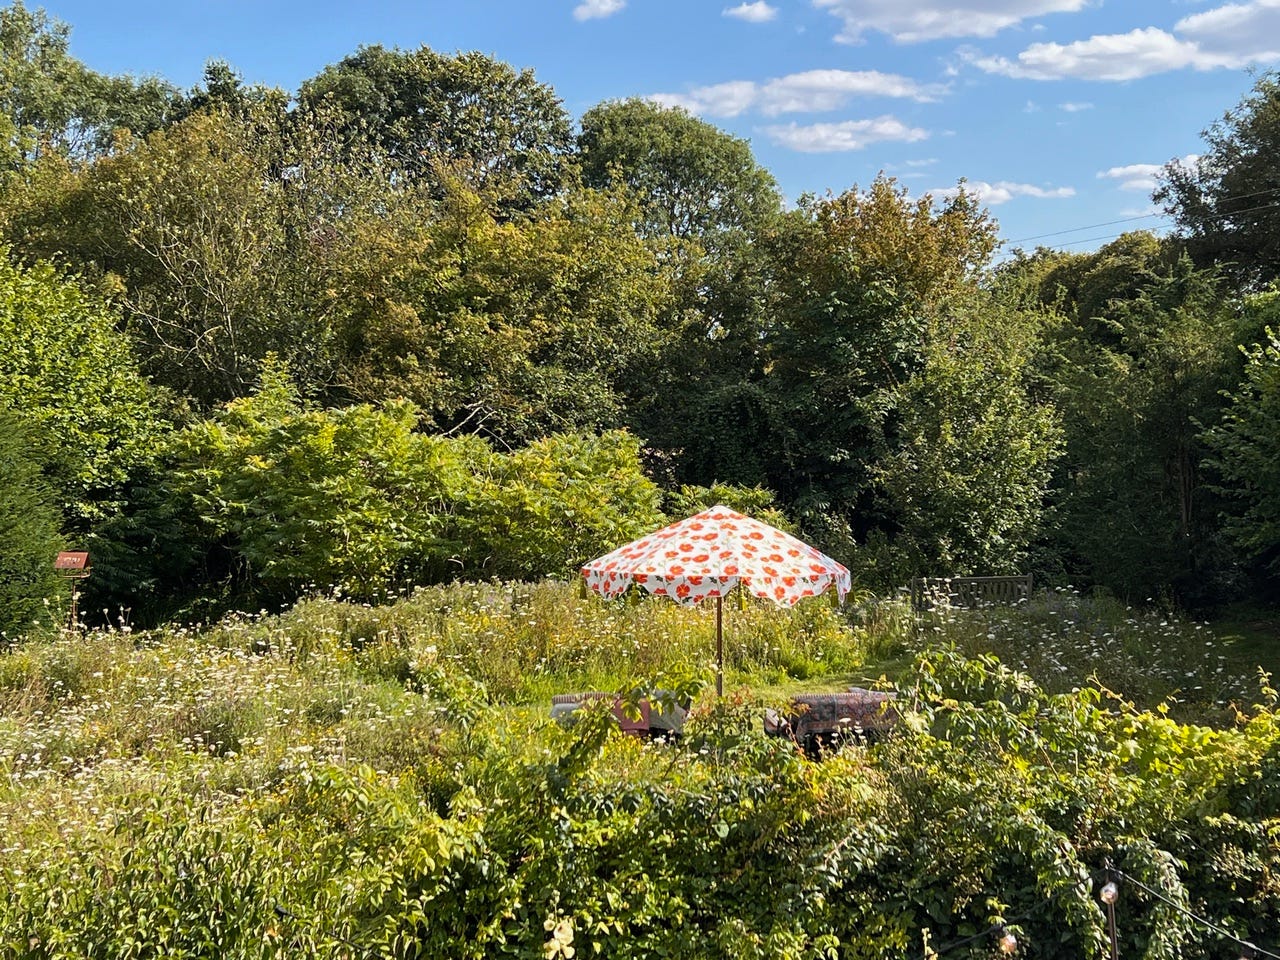 wildflower meadow with a table and a pretty floral umbrella